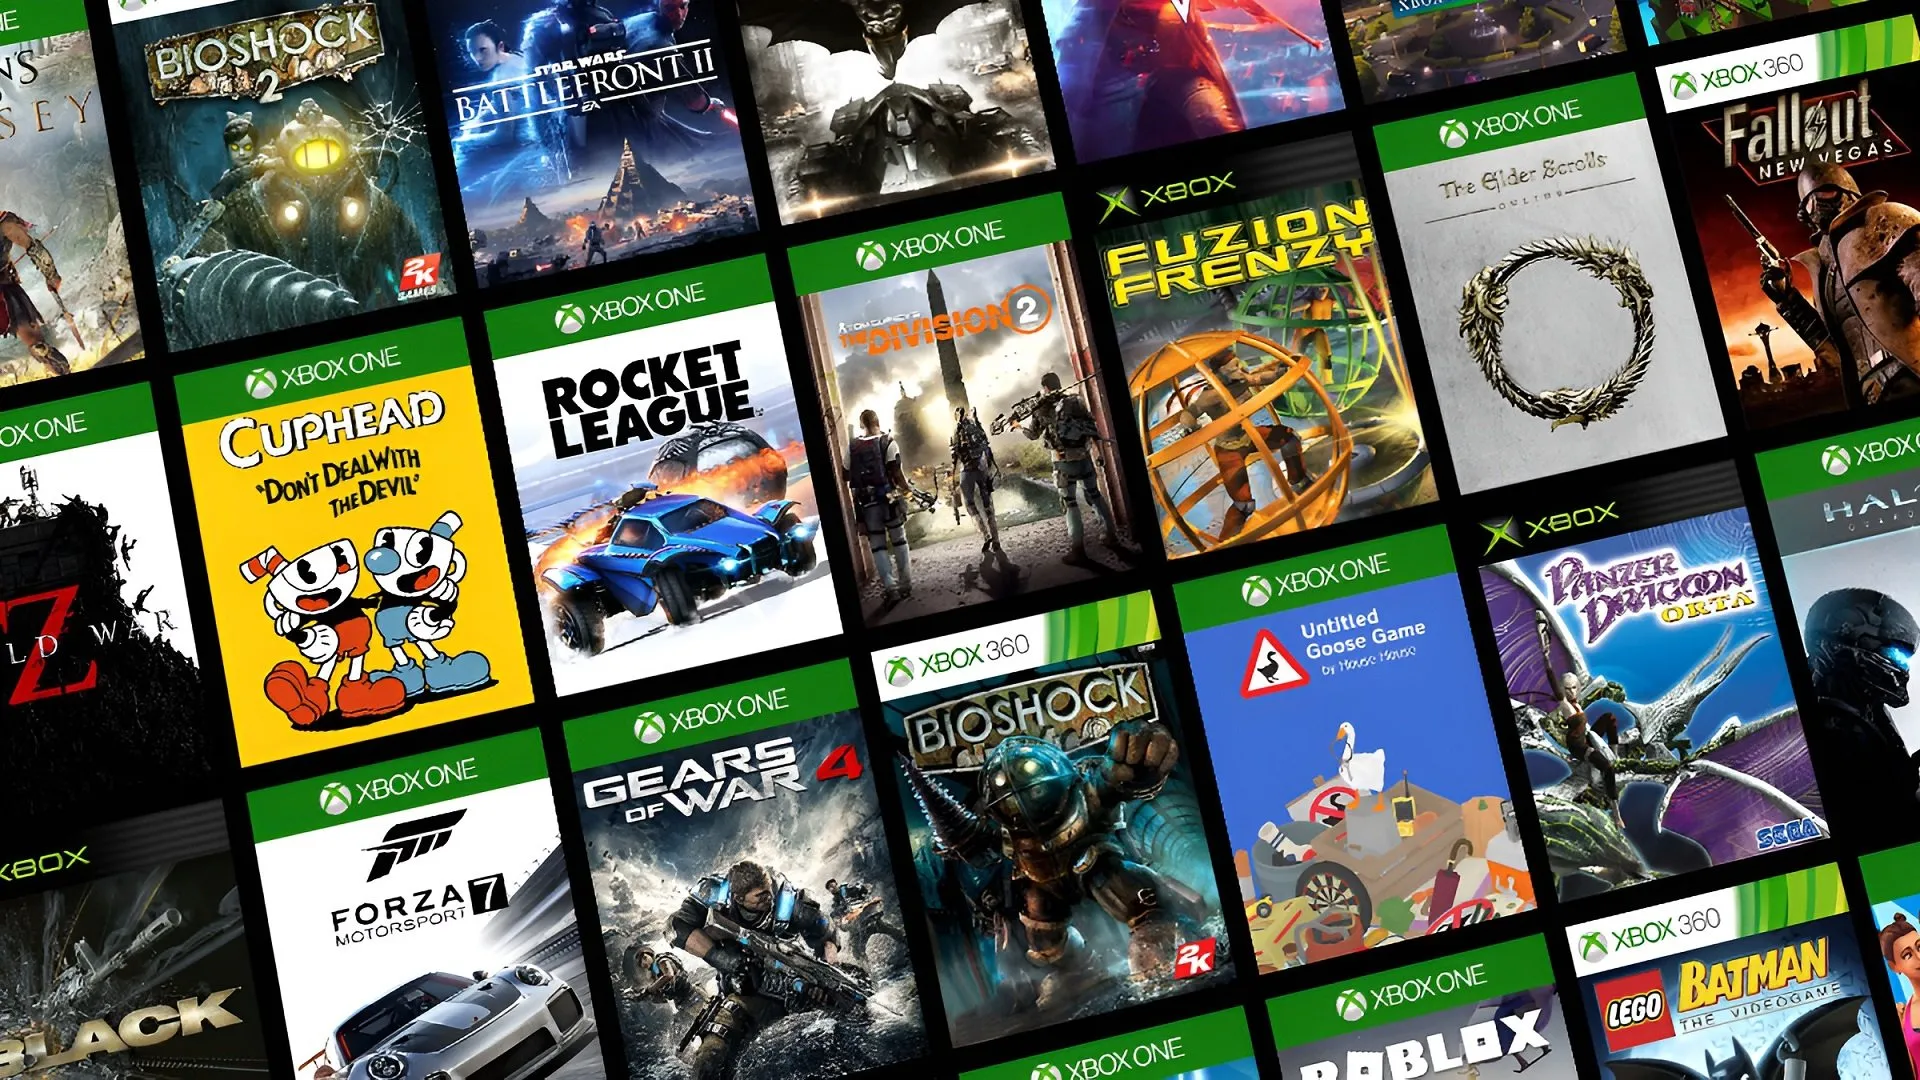 ugyldig kontrast Nøjagtig What are the best co-op games for Xbox One? - Game Freaks 365